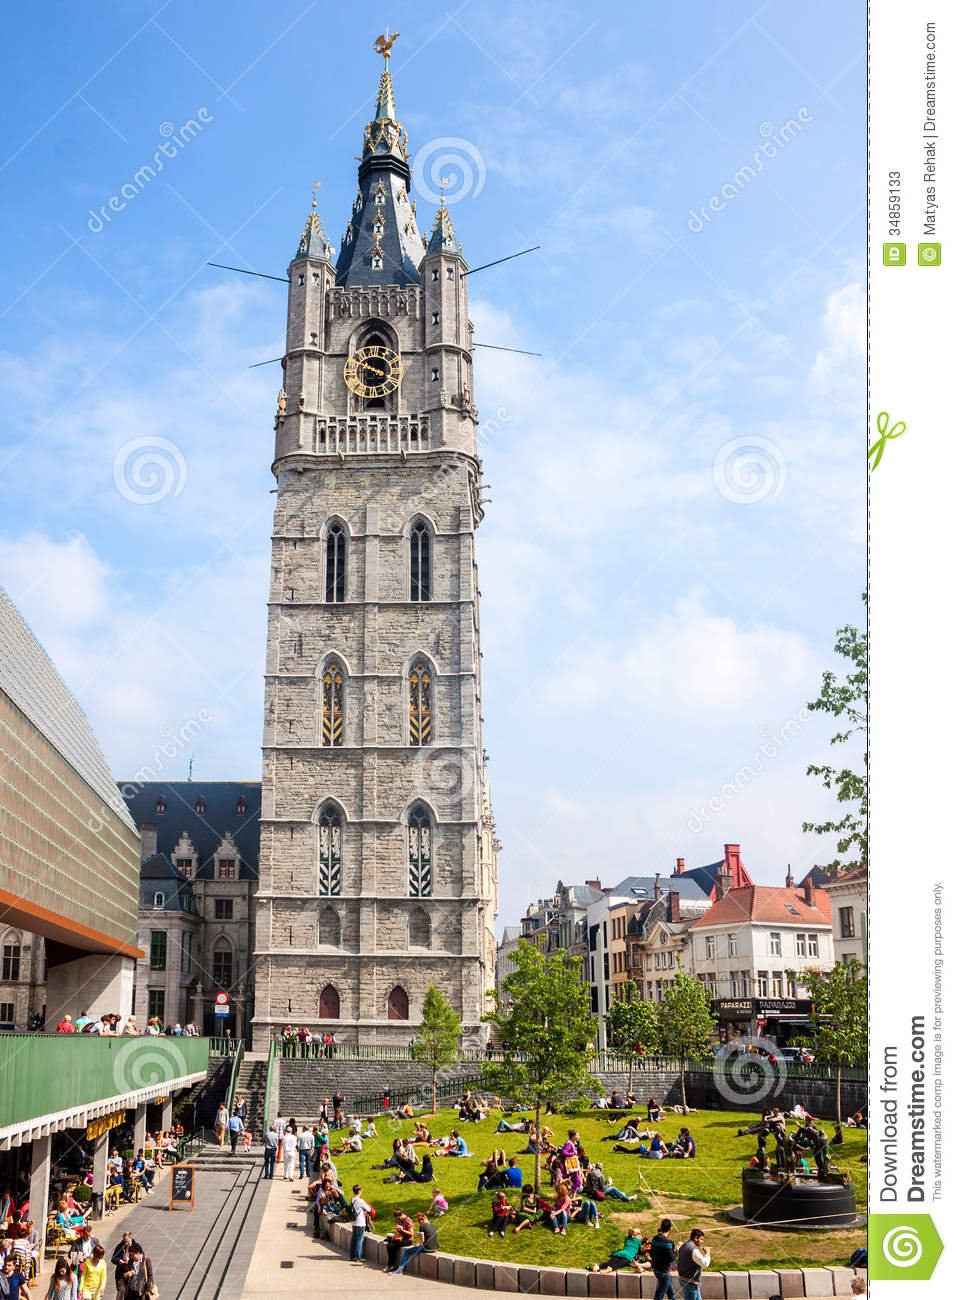 The Belfry of Ghent During Sunny Day